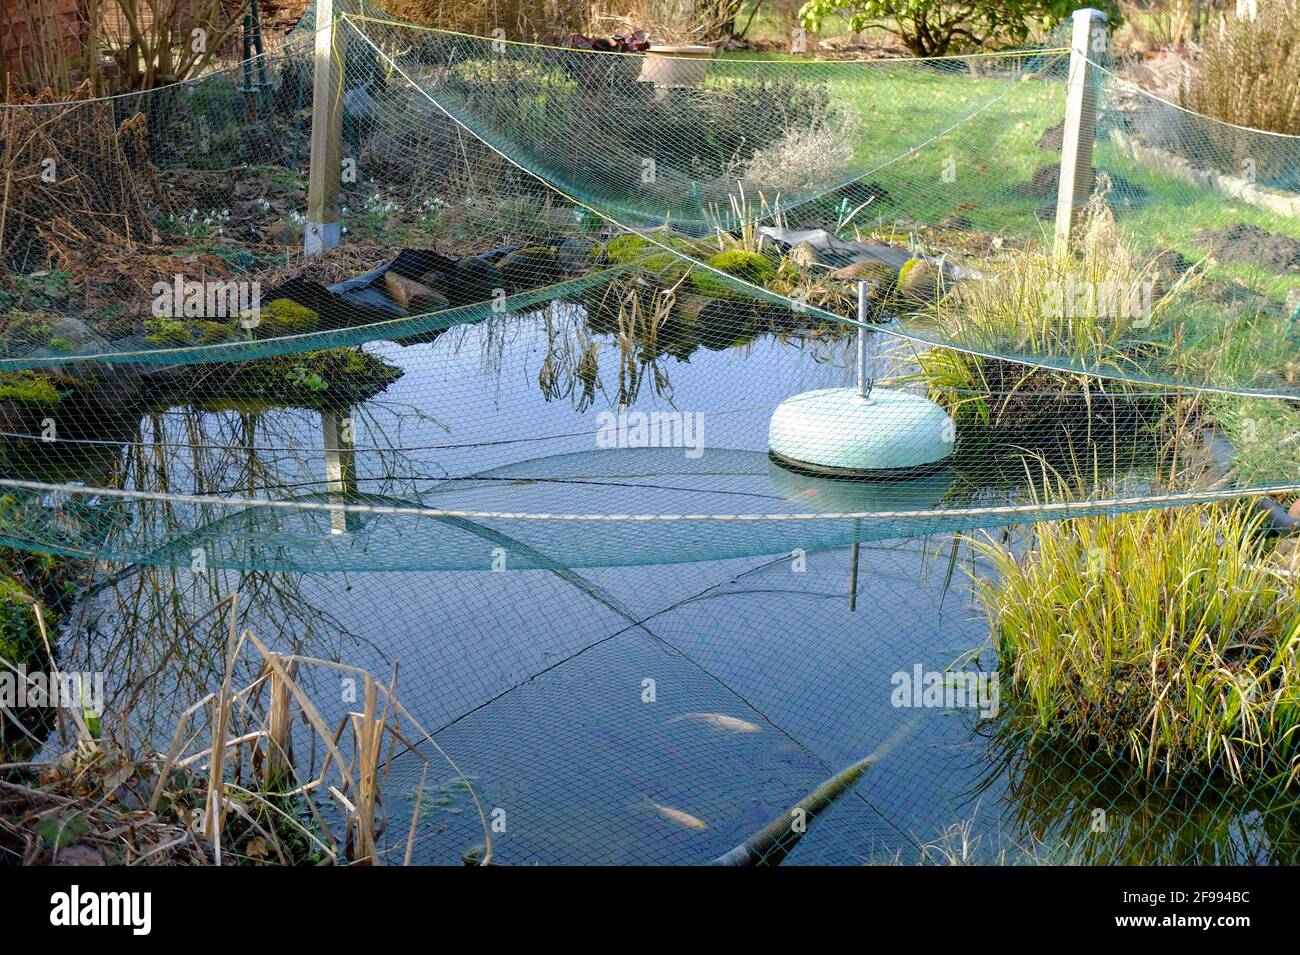 Garden pond with a net as protection from autumn leaves Stock Photo - Alamy